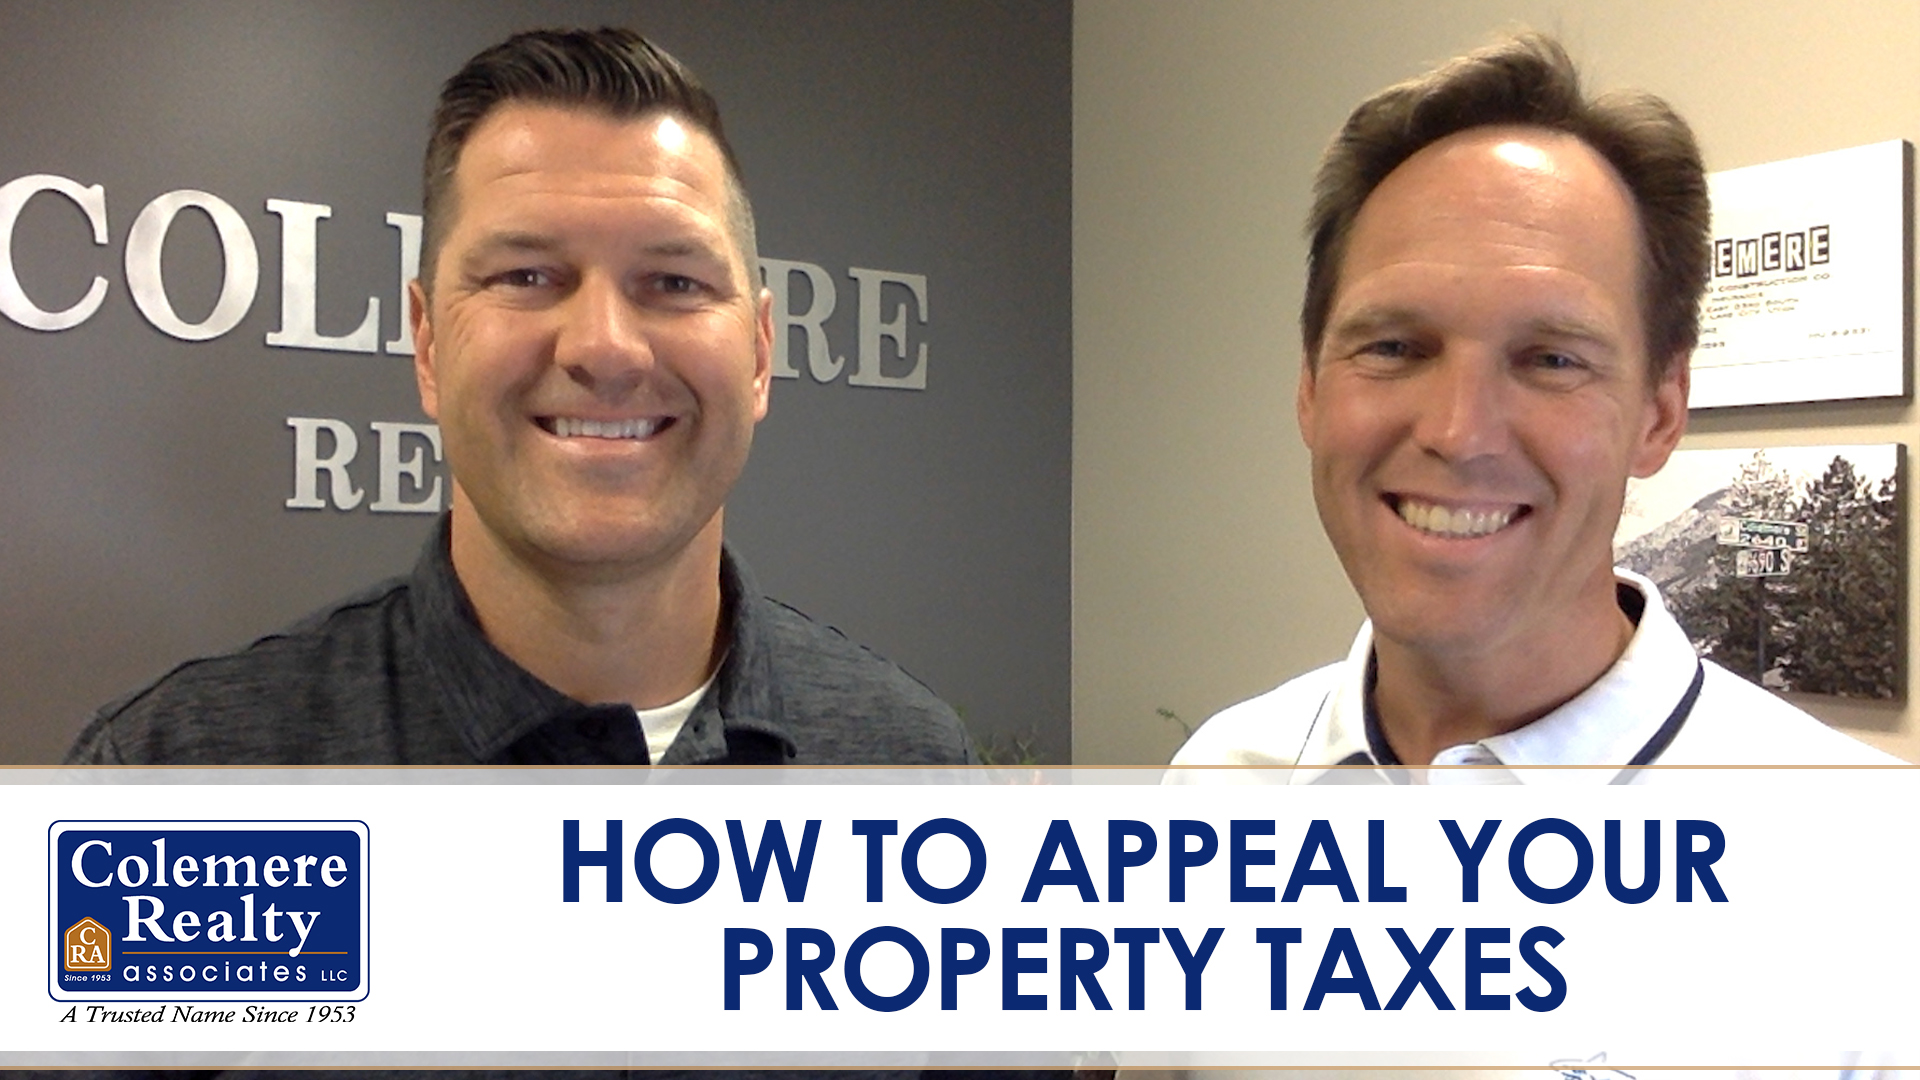 Should You Appeal Your Property Tax Assessment?